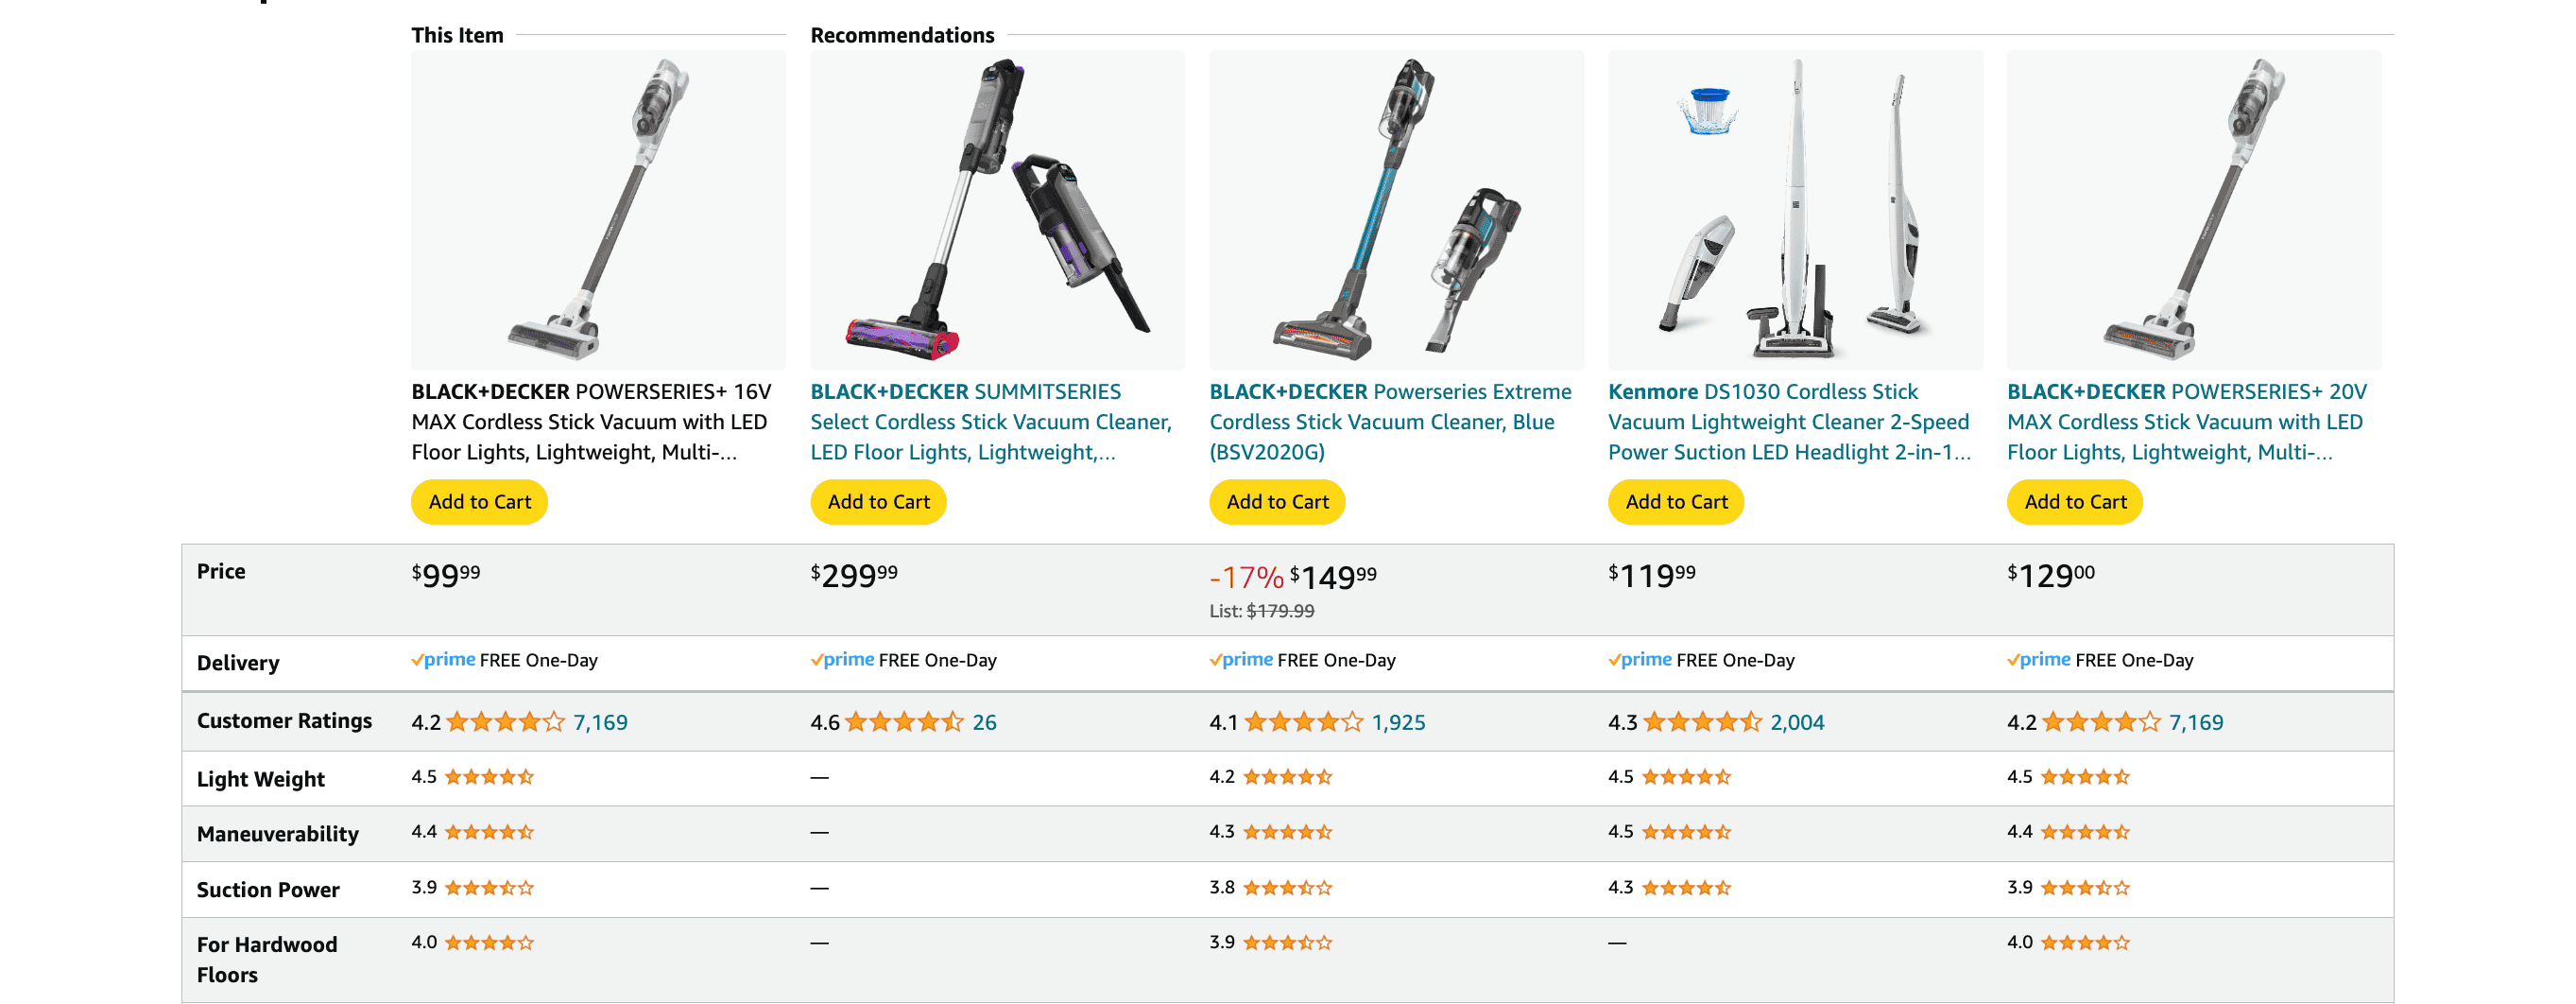 Here's an amazon product comparison table for cordless sweepers. 